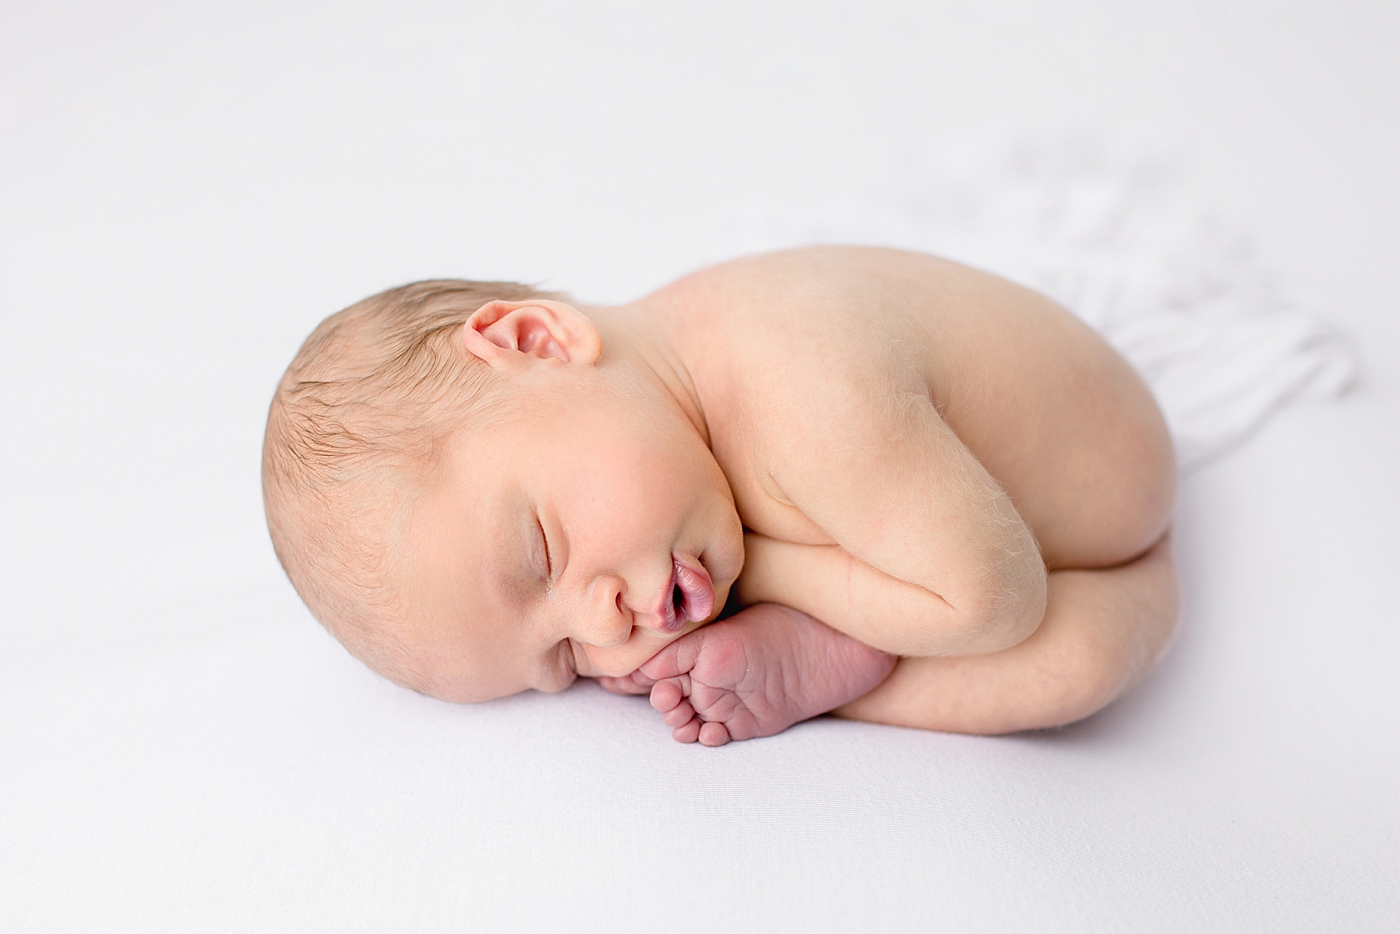 Newborn baby curled up on a white blanket | Image by Halleigh Hill